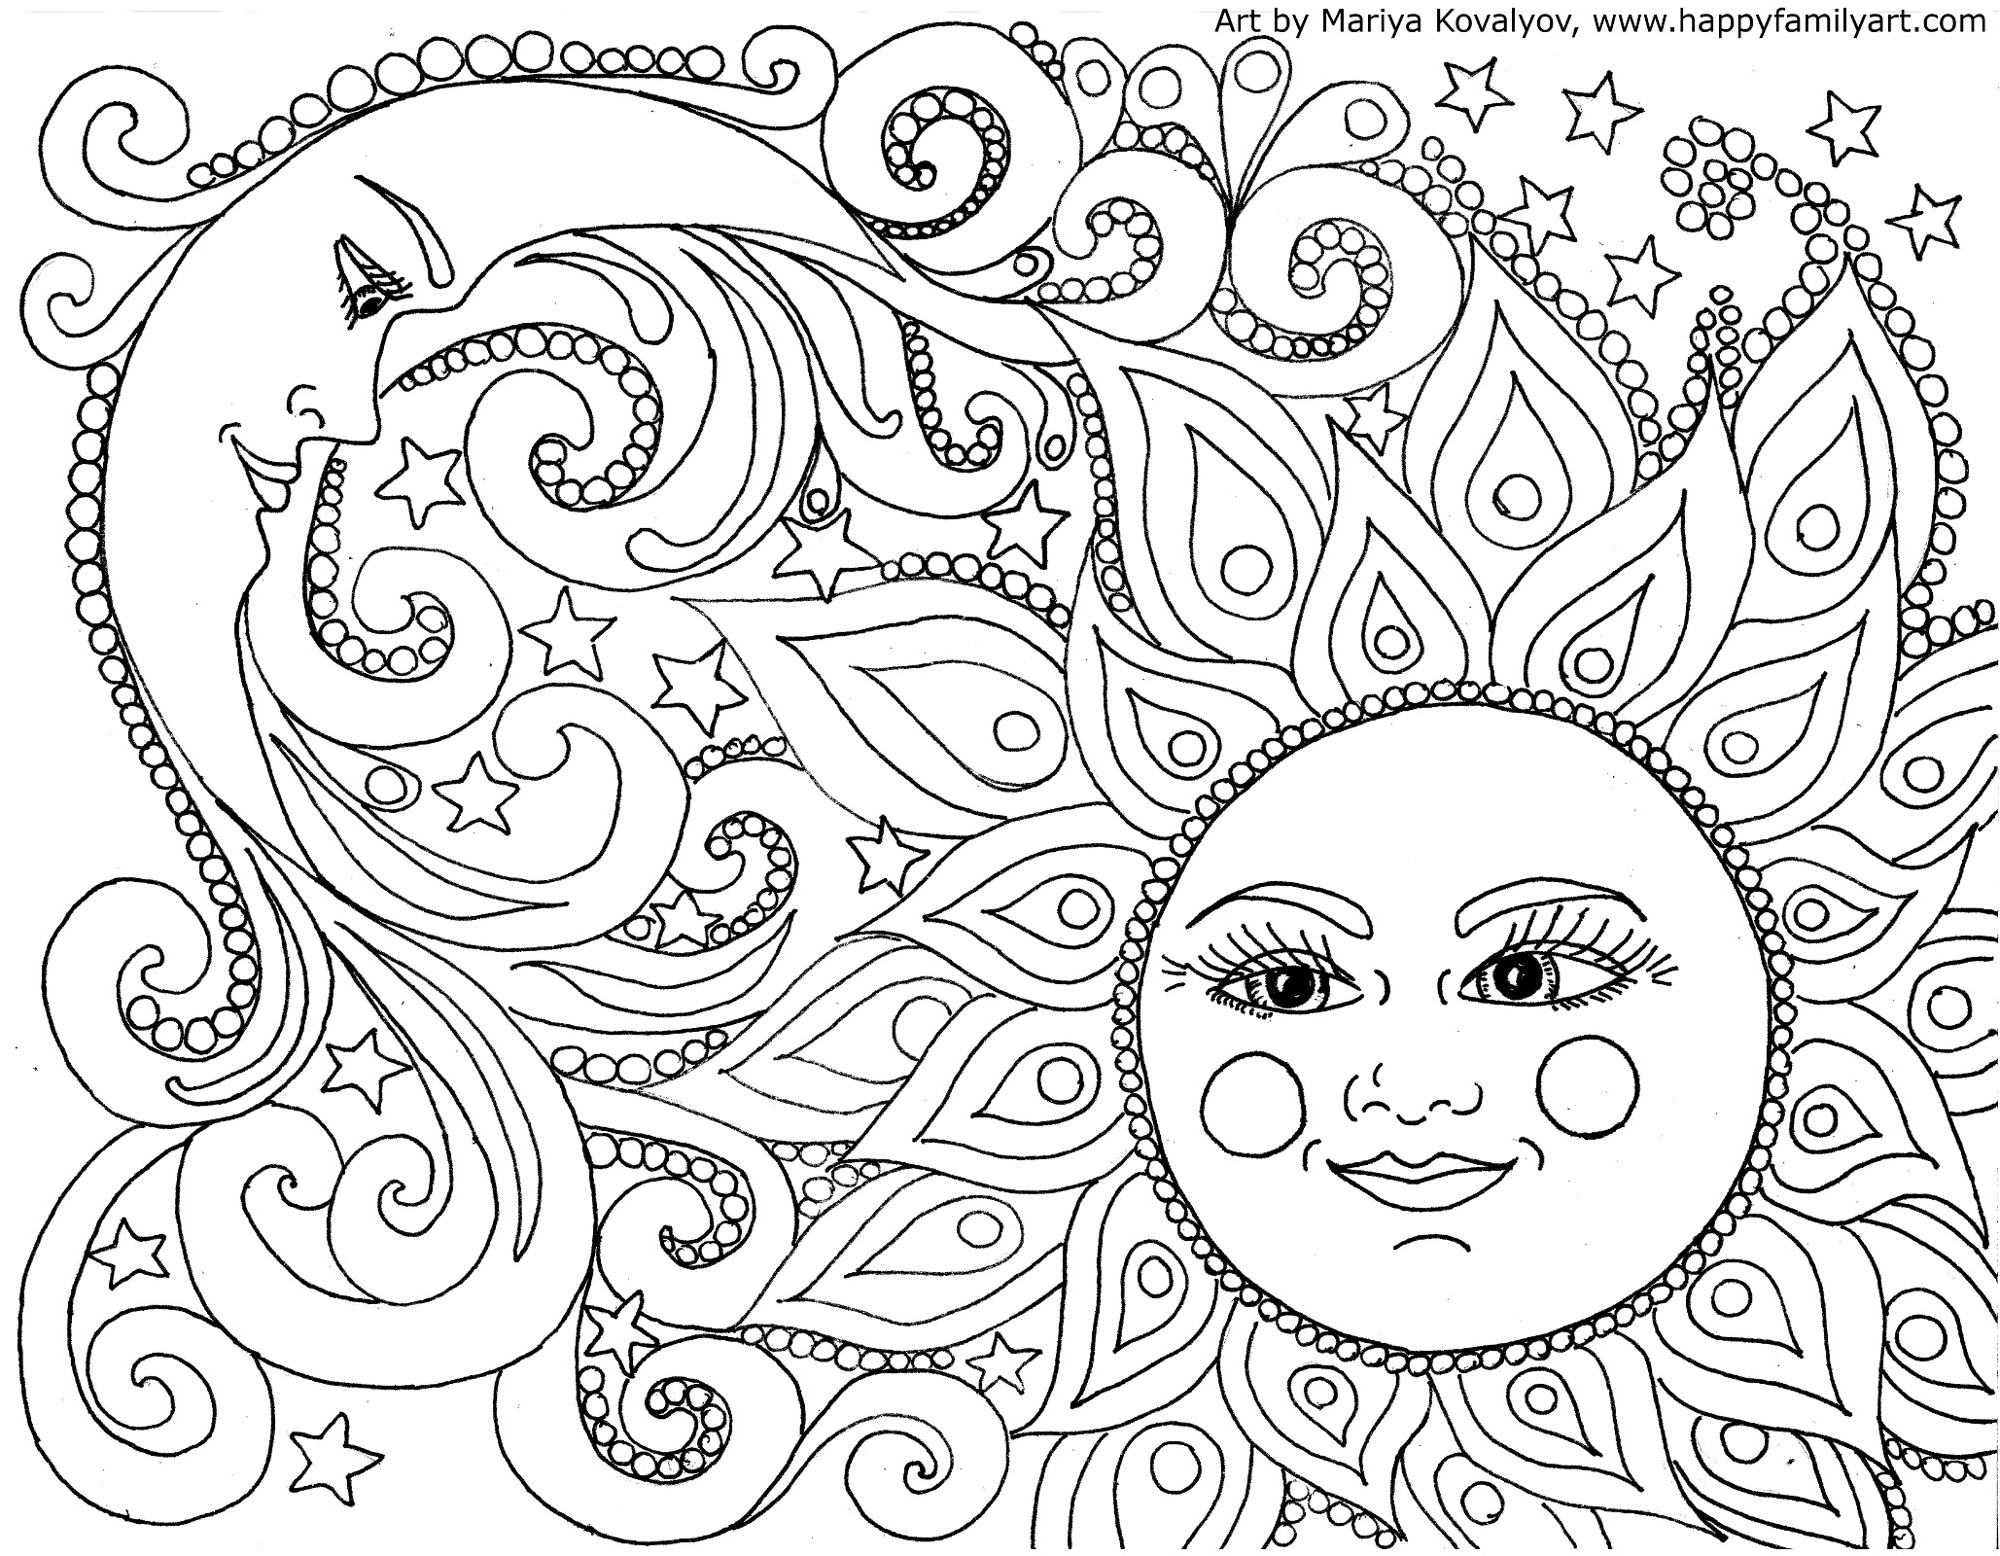 740 Coloring Page Of Picture Download Free Images